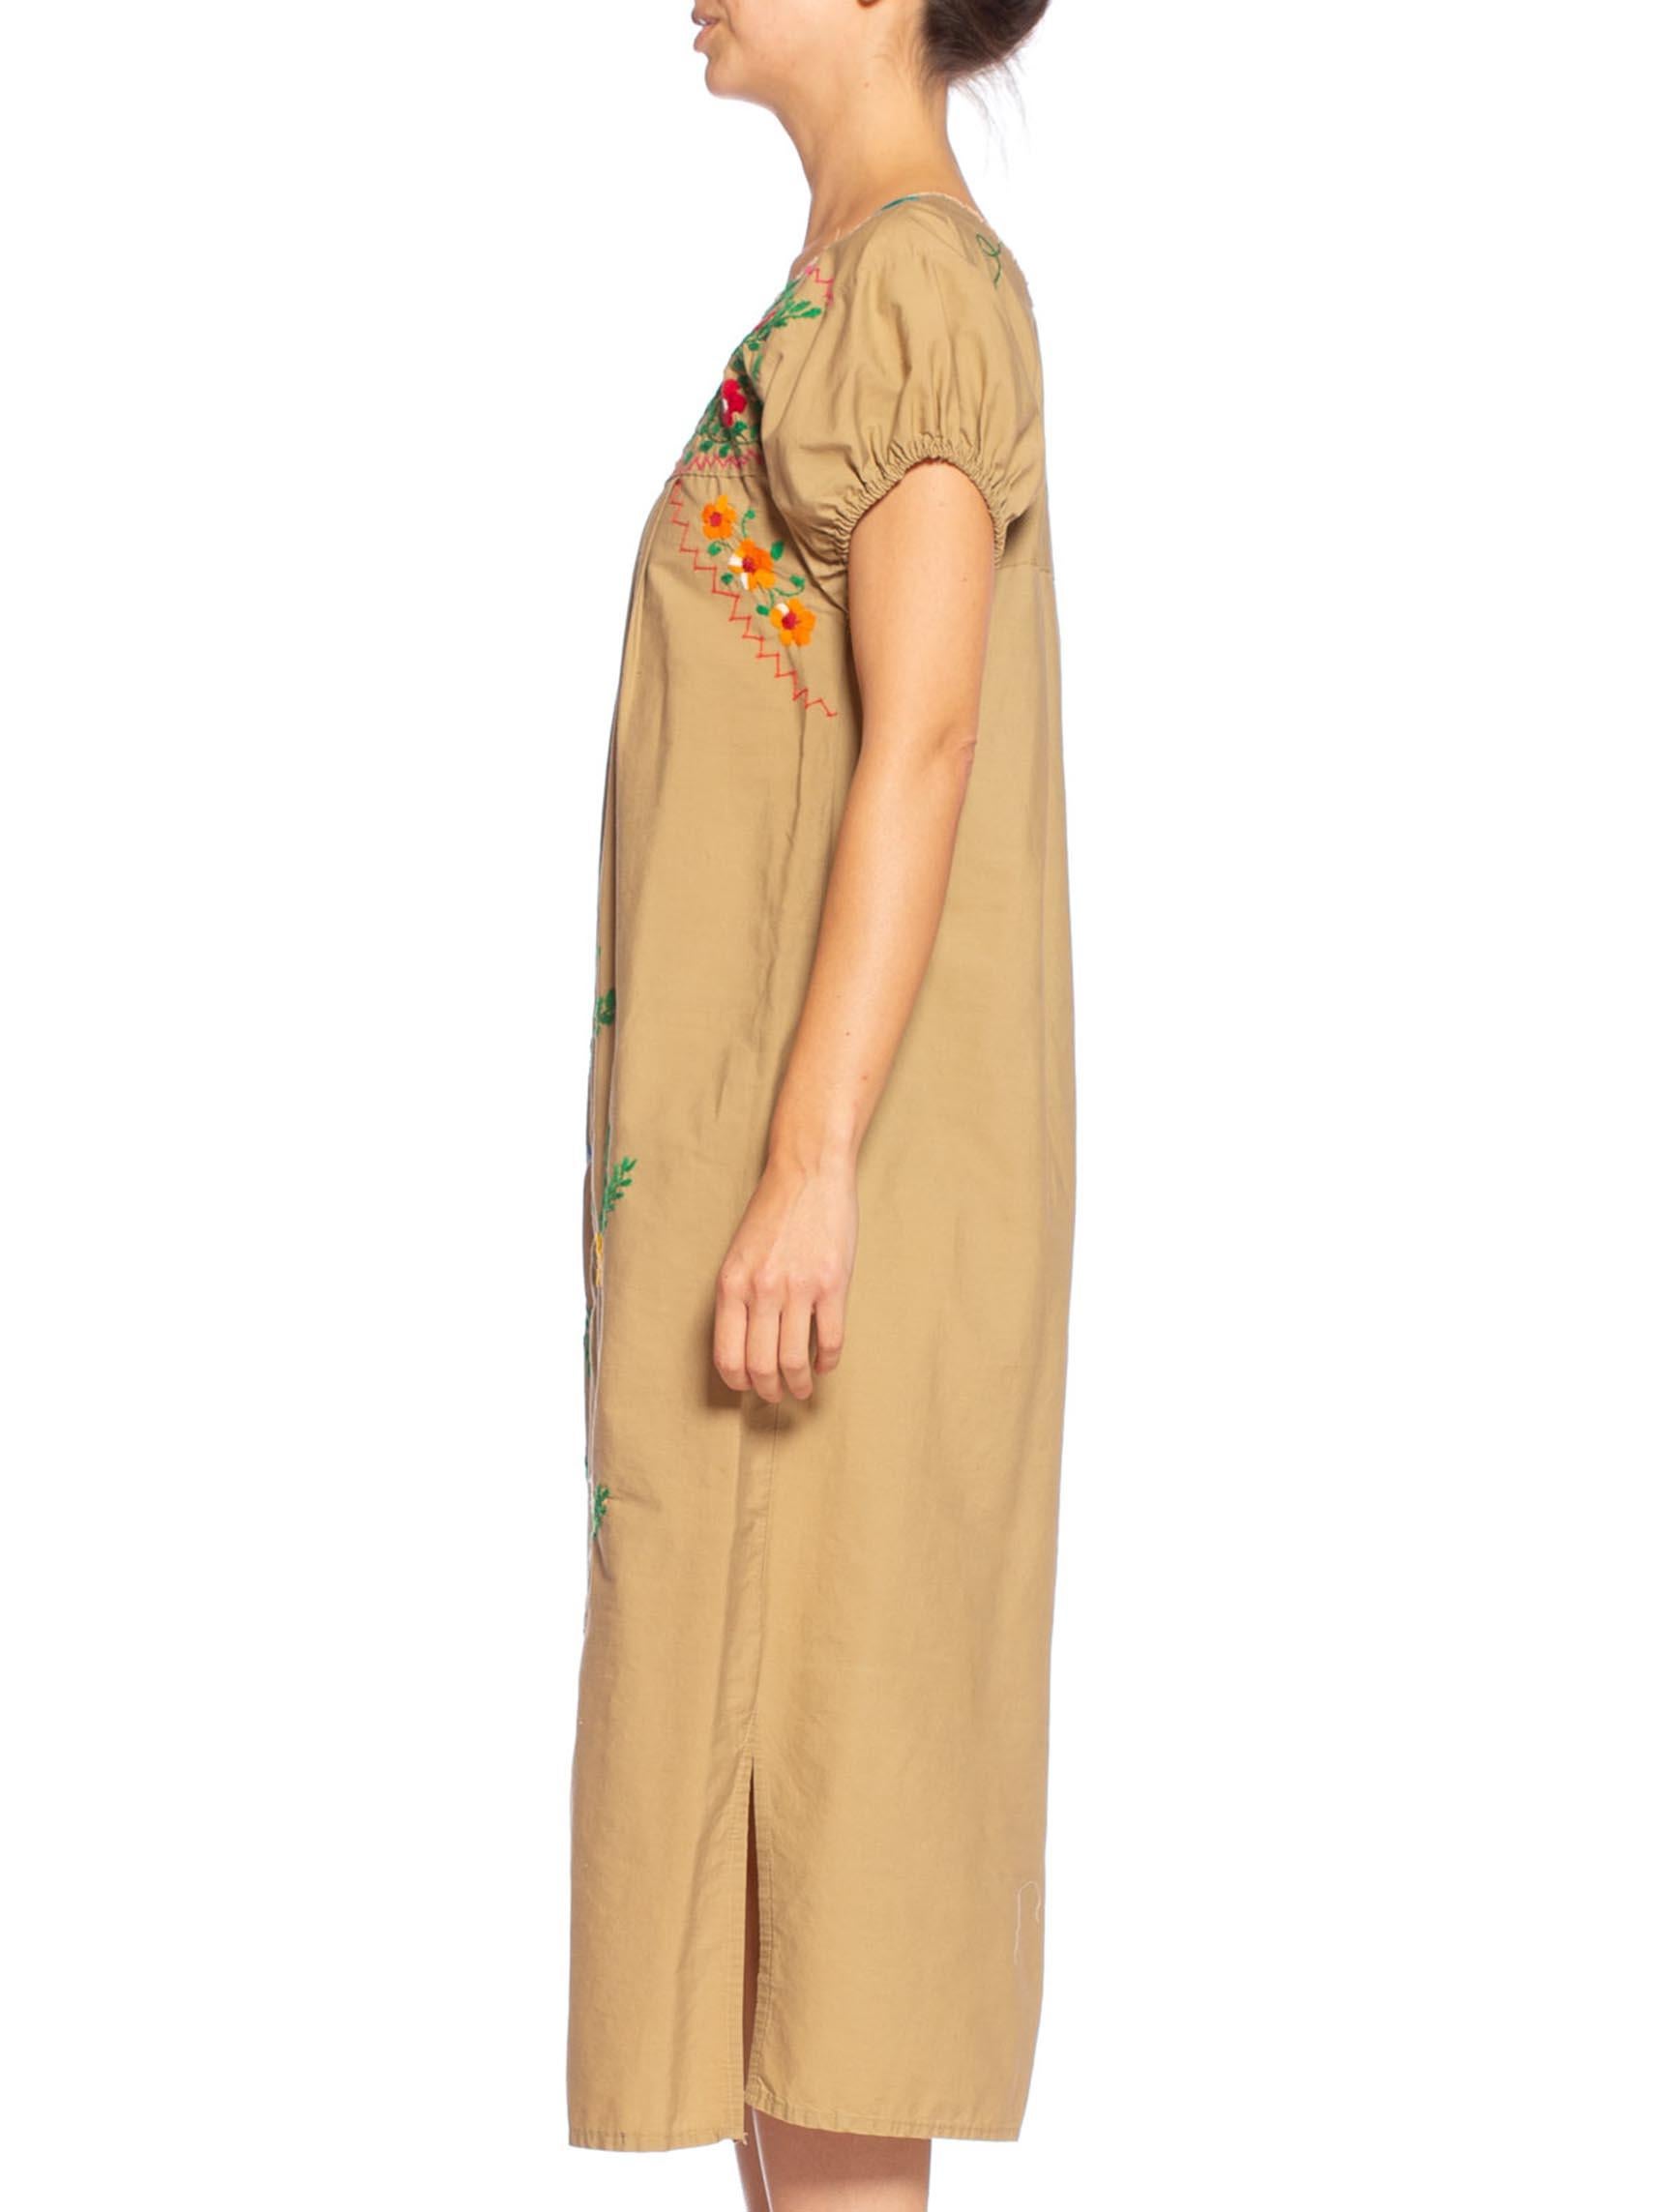 Beige 1970'S Mexican Cotton Dress Covered In Hand Embroidered Flowers